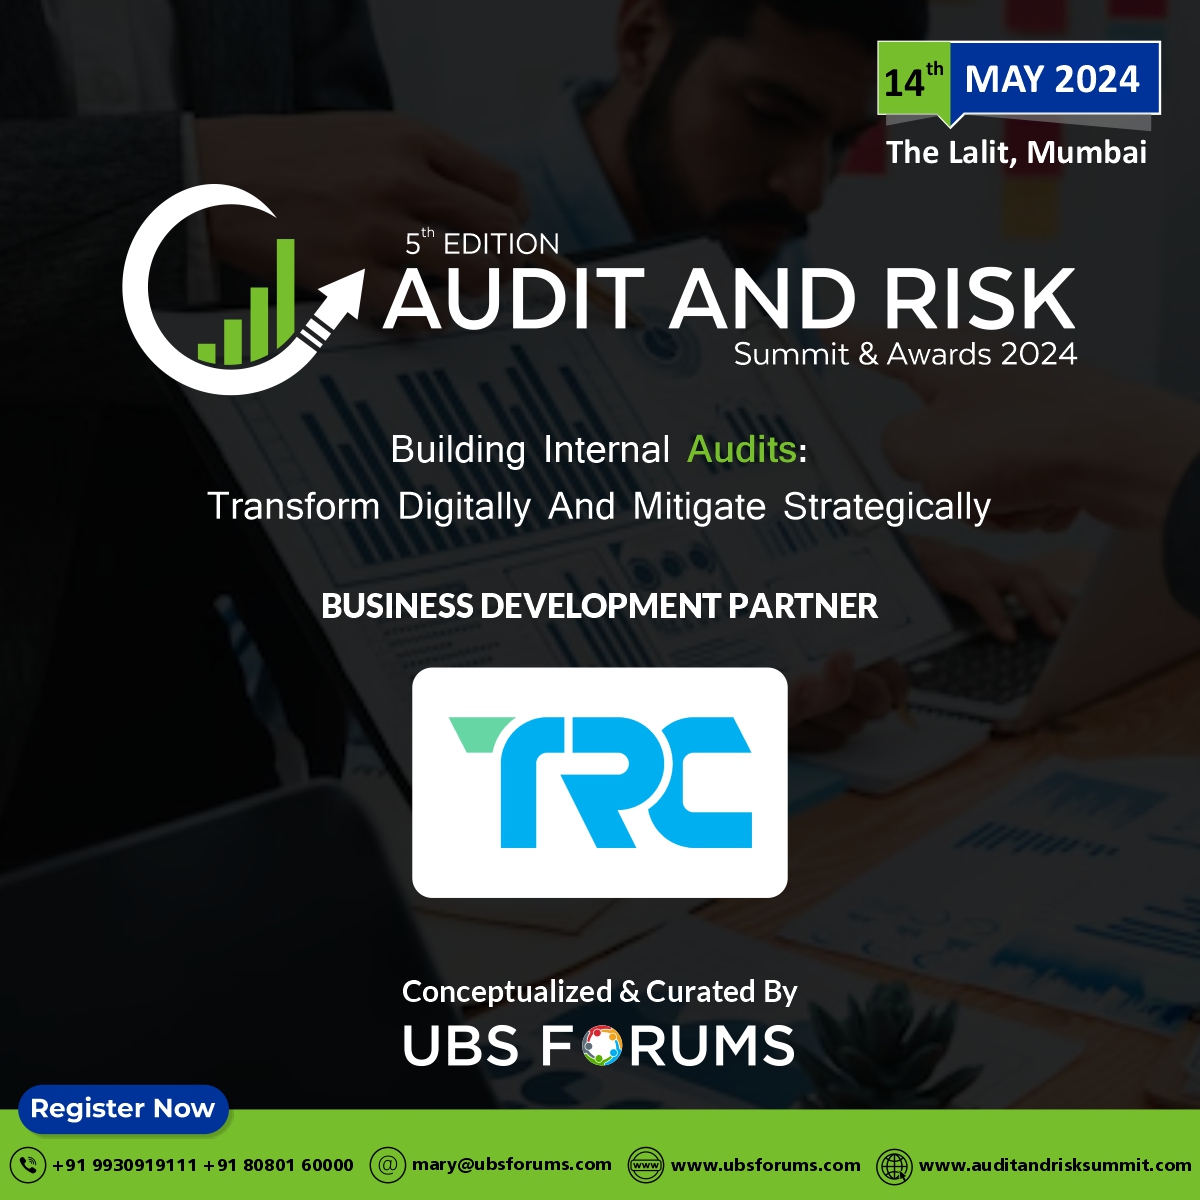 We are thrilled to extend a warm welcome to 𝗧𝗥𝗖 𝗖𝗼𝗿𝗽𝗼𝗿𝗮𝘁𝗲 𝗖𝗼𝗻𝘀𝘂𝗹𝘁𝗶𝗻𝗴 our Business Development Partner for the Exclusive '5th Edition Audit & Risk Summit & Awards 2024.” 📅14th May 📍The Lalit, Mumbai Register- tinyurl.com/2p375dek #UBSFAAR #risk #audit